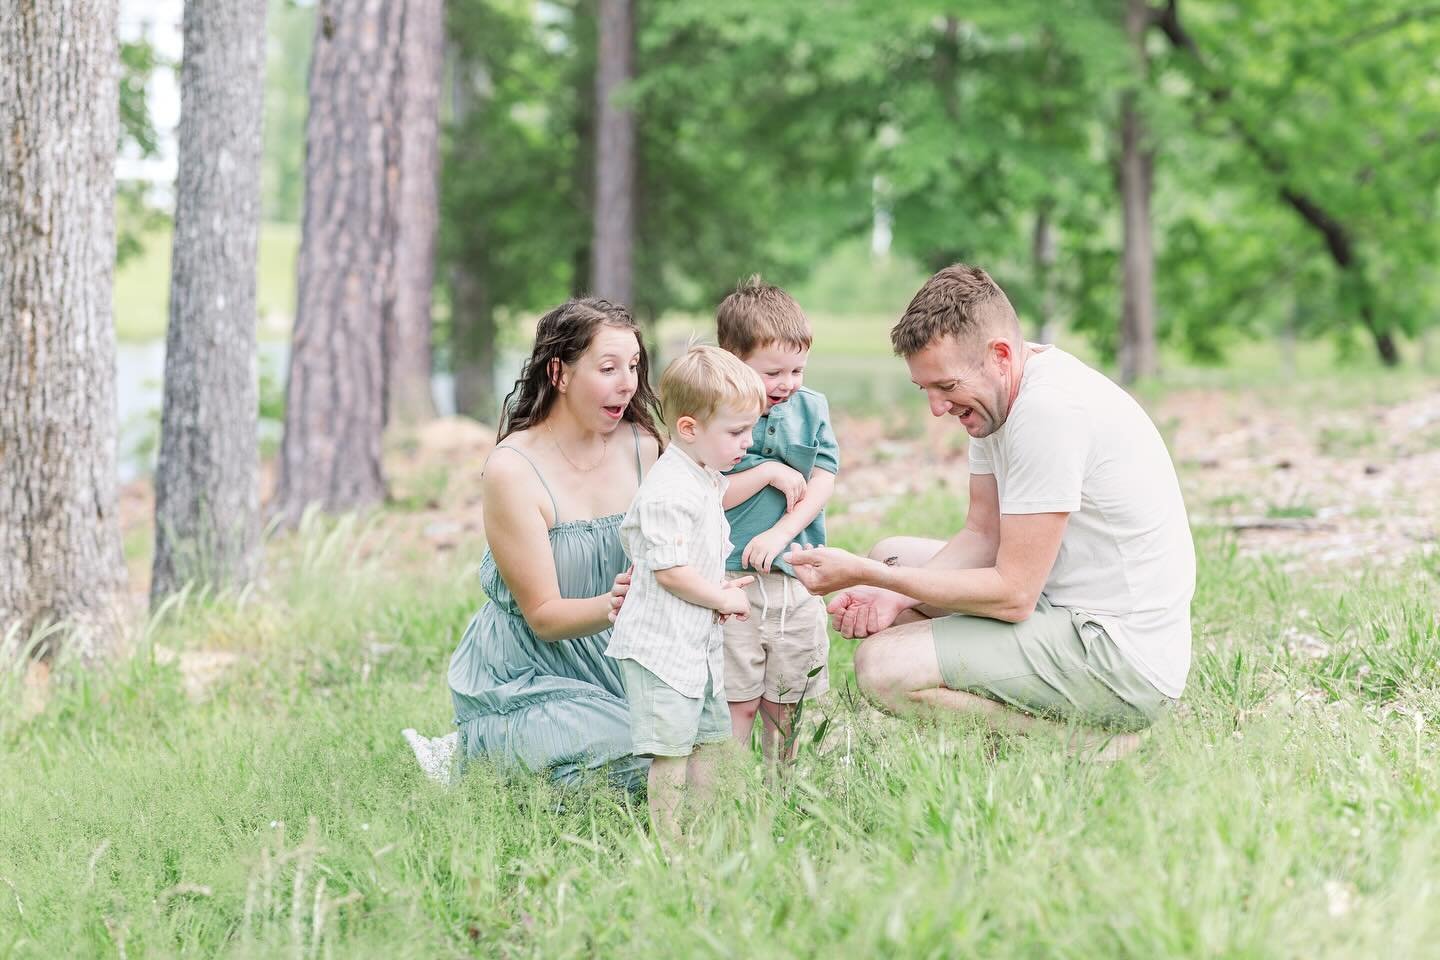 Adventures on this sweet family&rsquo;s Photoshoot! Finding frogs and capturing that sweet moment is pure joy! 
 
I&rsquo;m working away on the full gallery and this session will be up on my photography journal soon! For now, enjoy the sneak peek! 
 